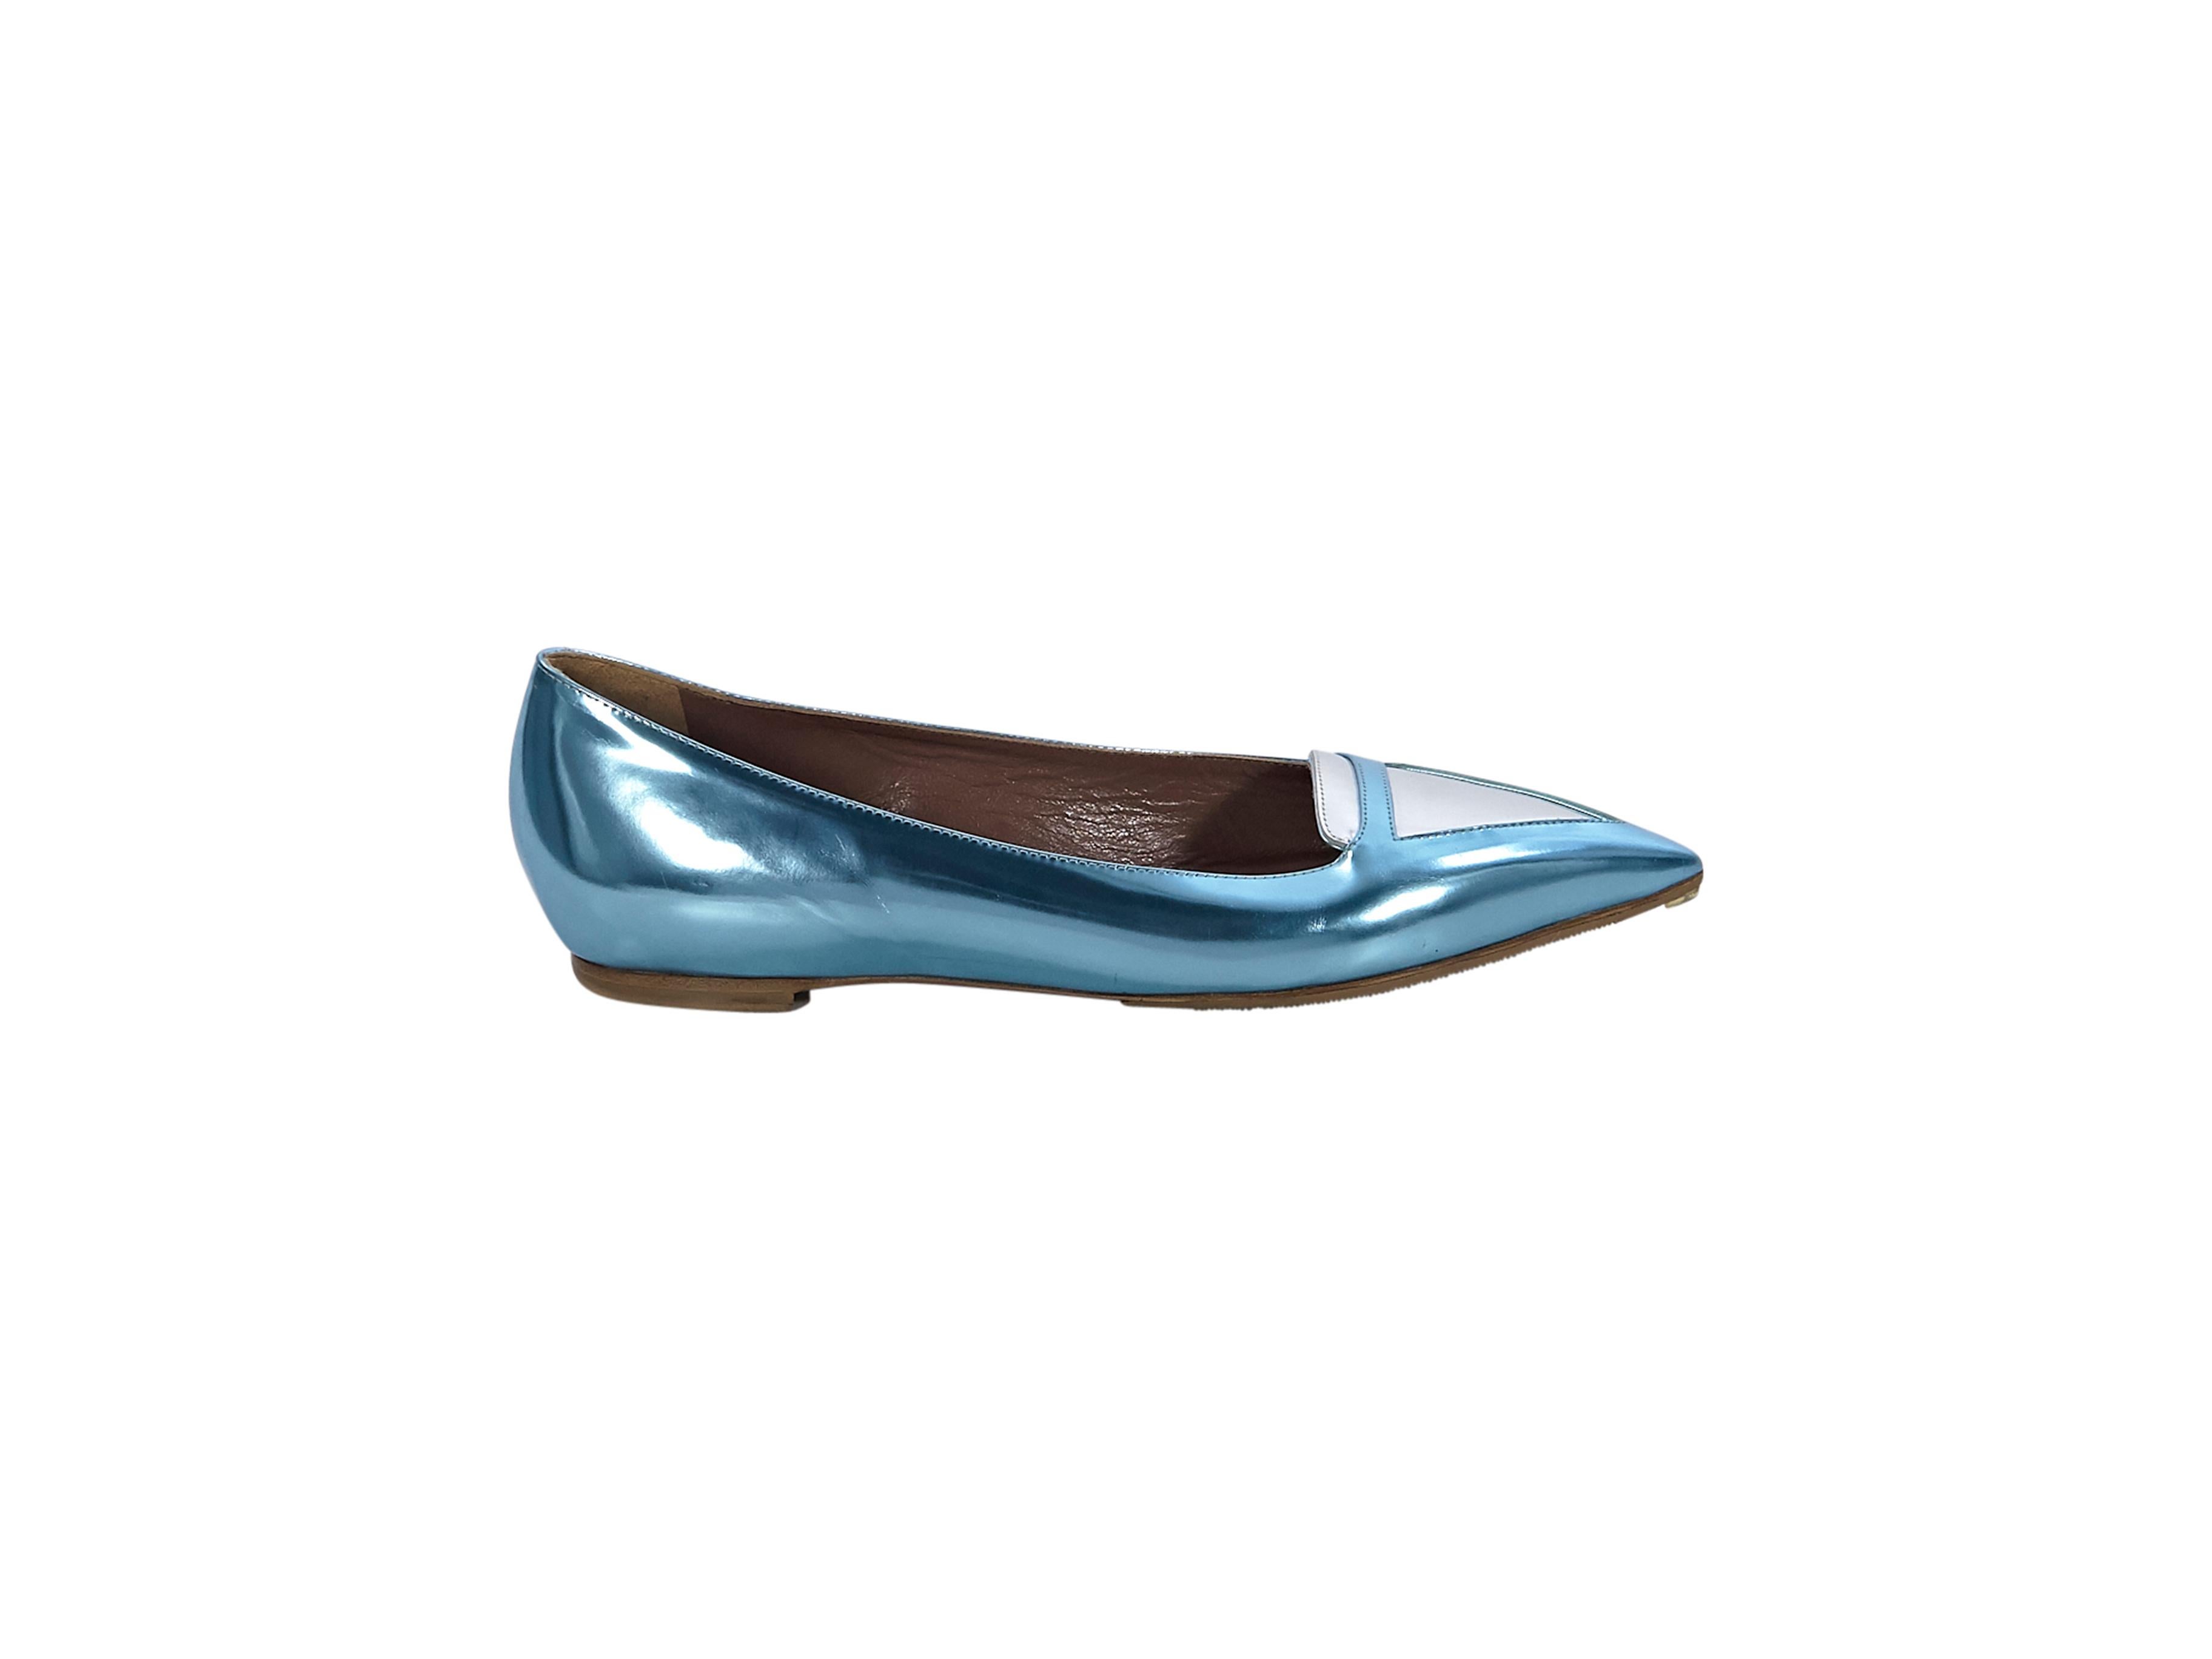 Product details:  Metallic blue and silver leather flats by Tabitha Simmons.  Point toe.  Slip-on style. 
Condition: Pre-owned. Very good. 
Est. Retail $ 625.00